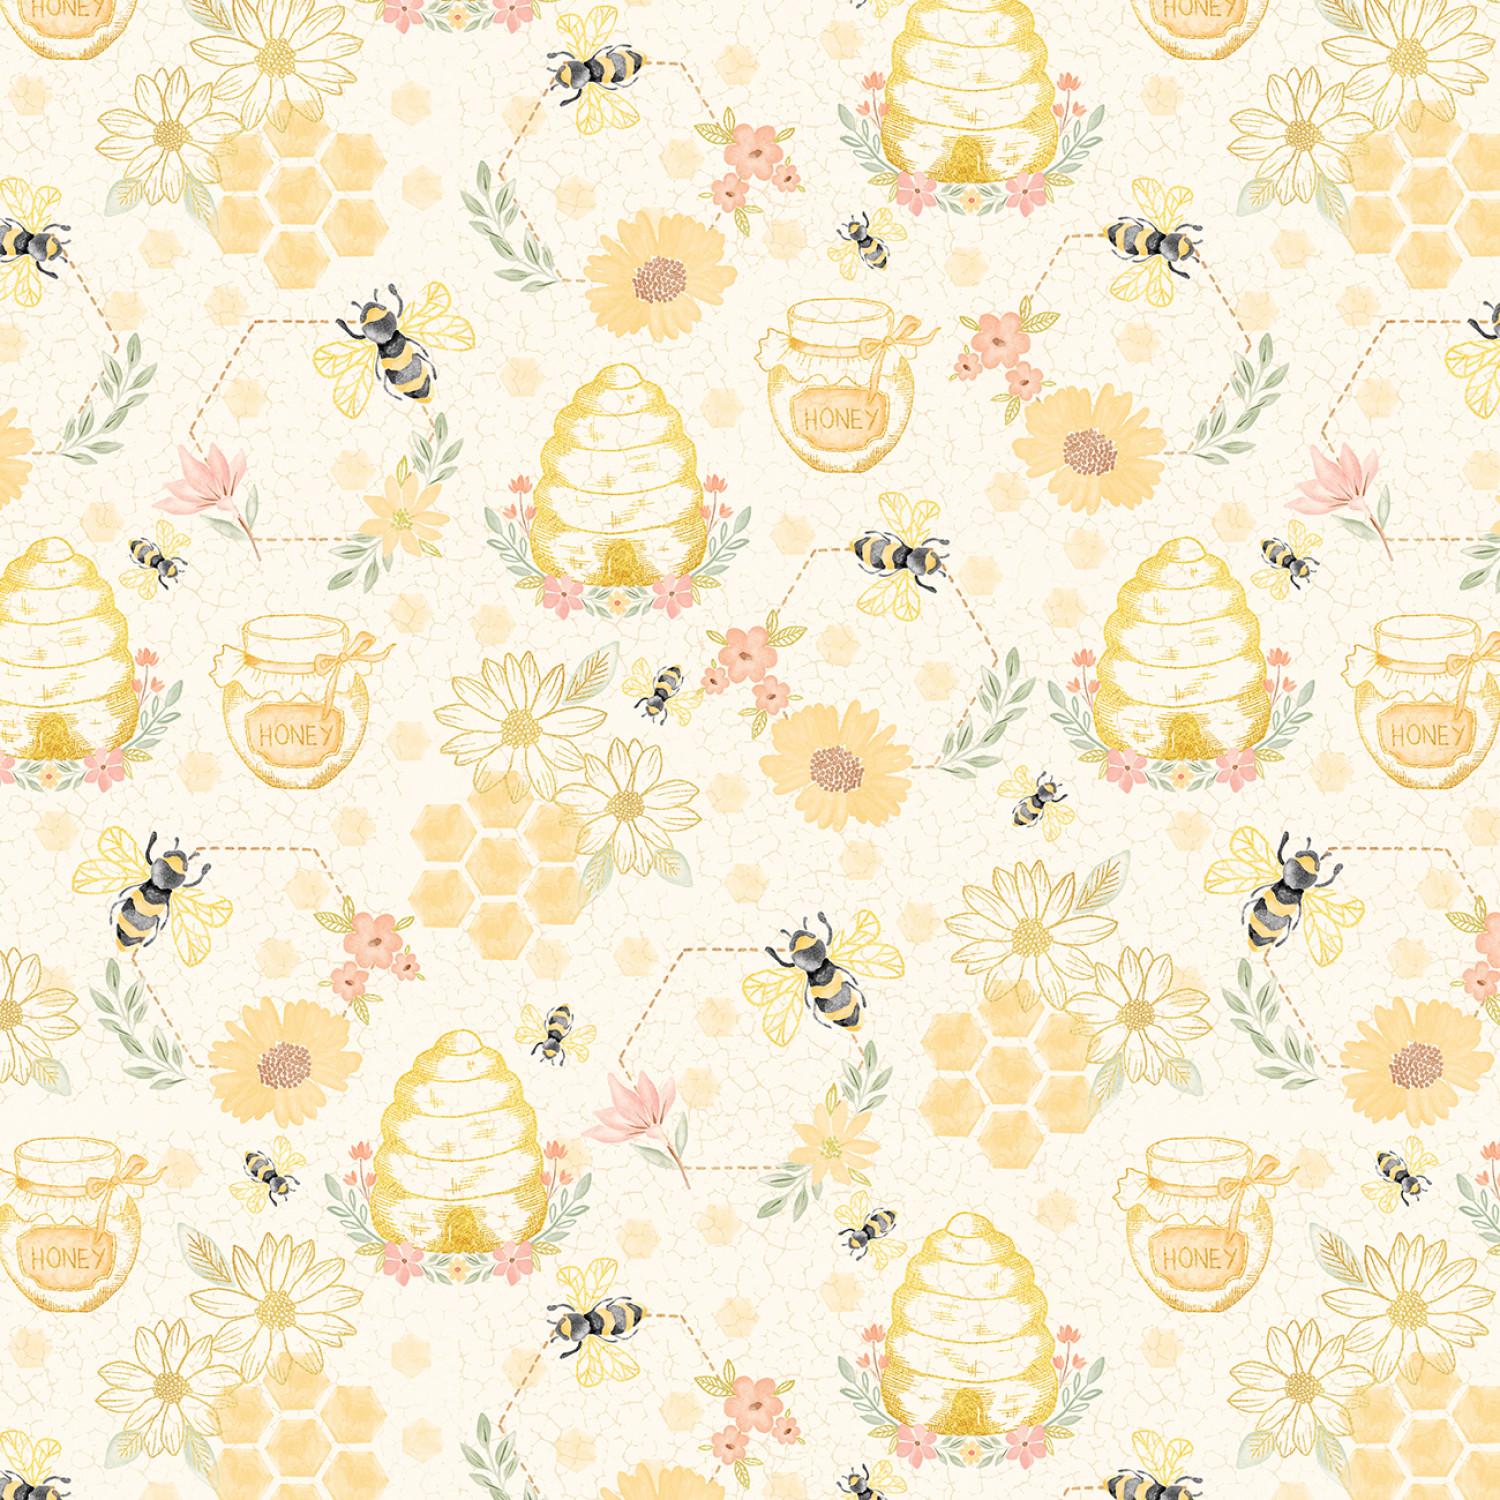 Home Sweet Home -   Quilting Bees - CD3042-CREAM